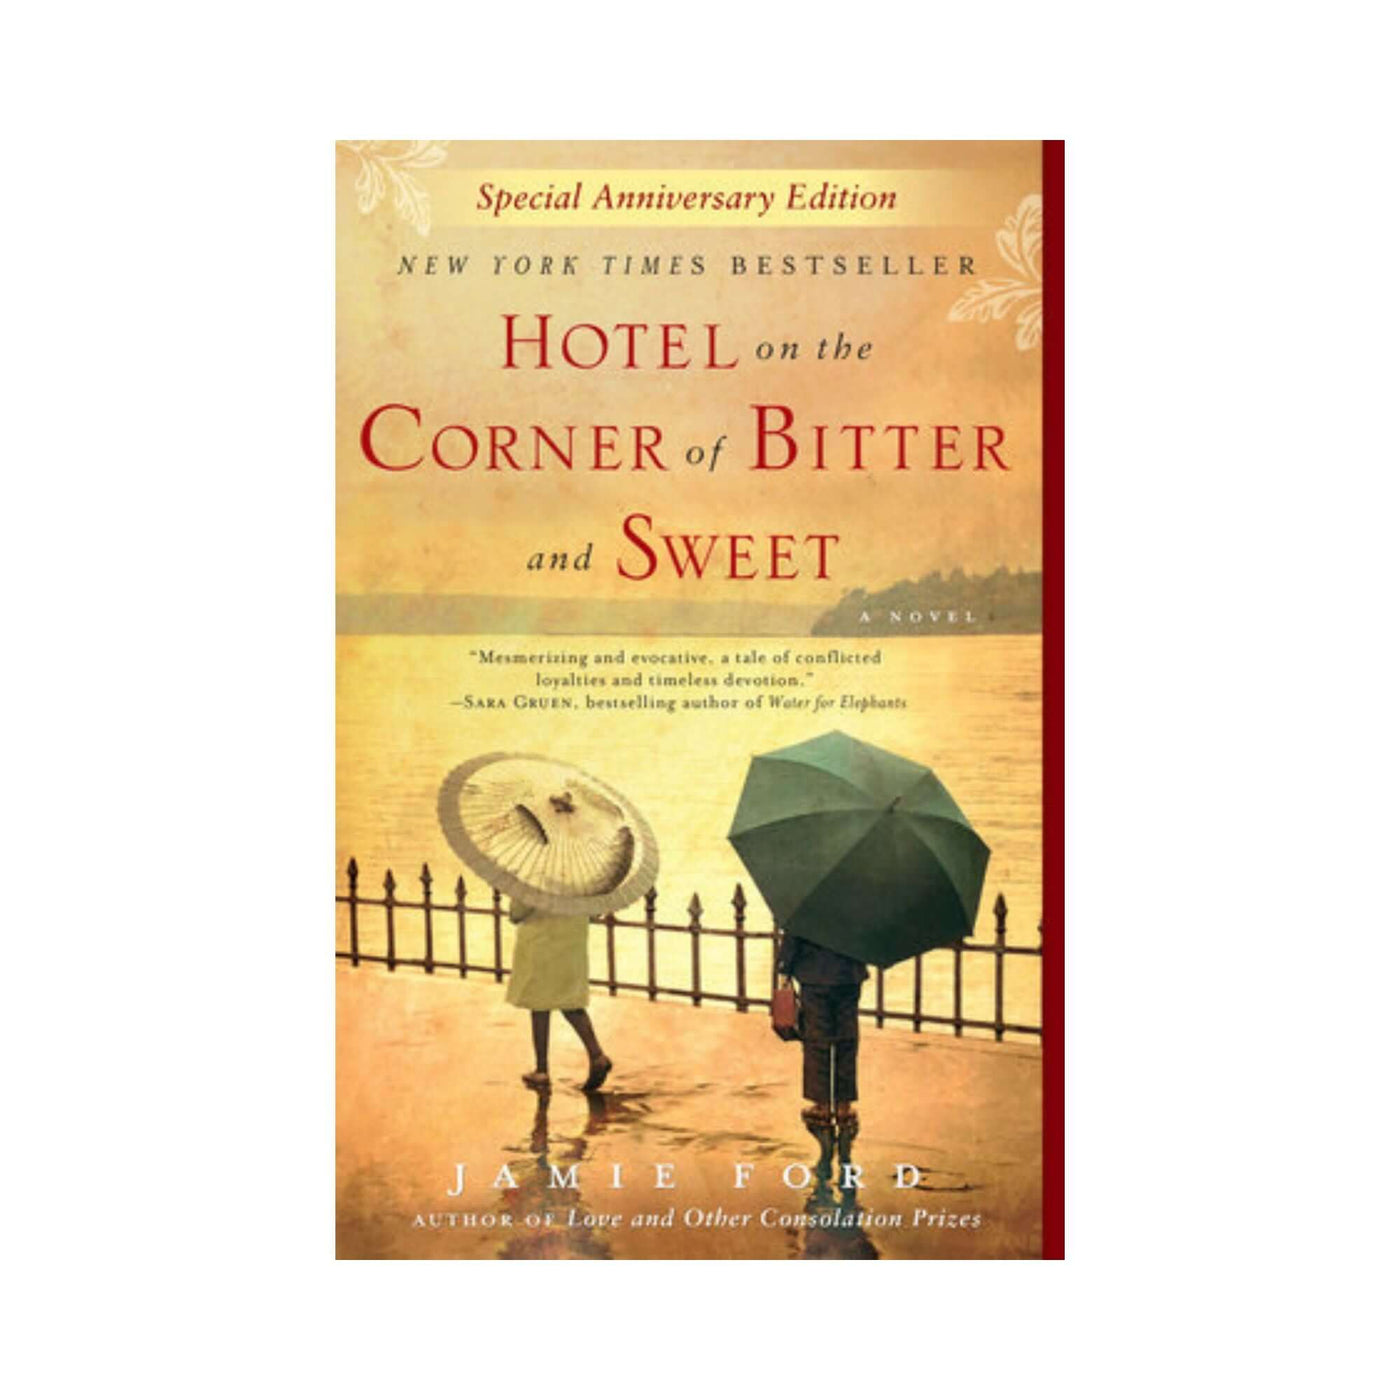 Hotel on the Corner of Bitter and Sweet by Jamie Ford (Signed Copy)